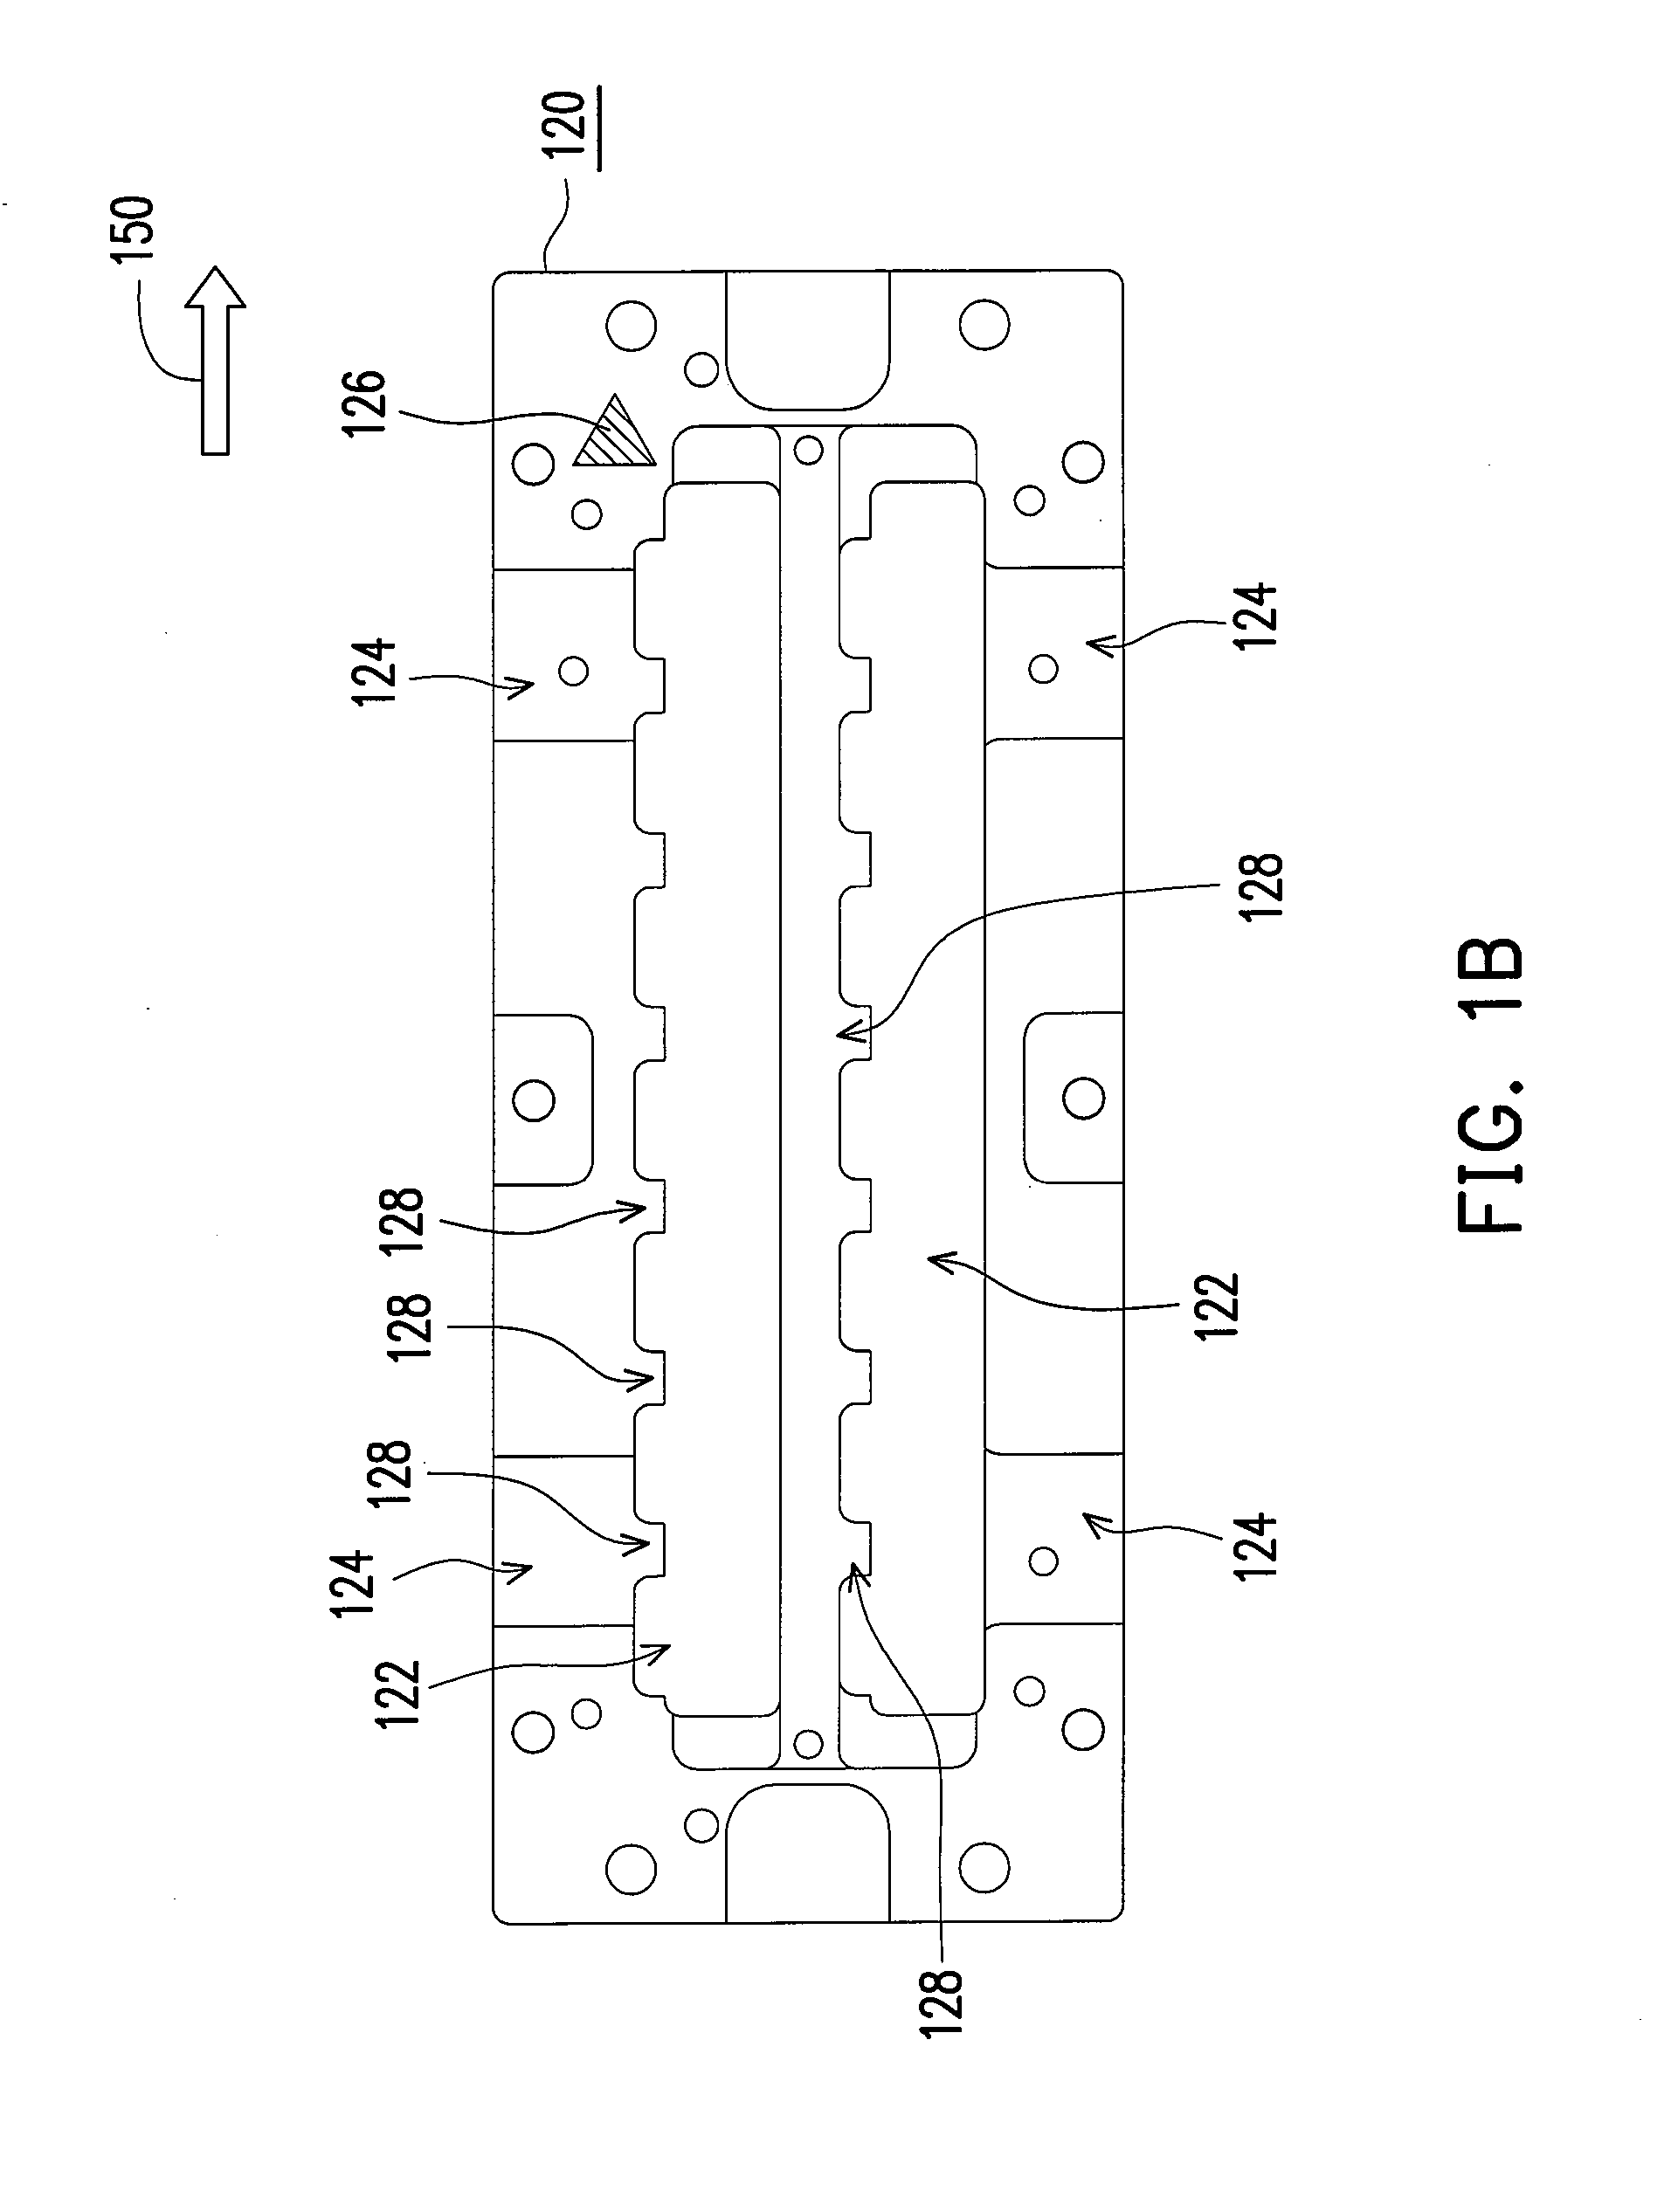 Carrier for manufacturing a memory device, method using the same, memory device using the same and manufacturing method of a memory device using the same